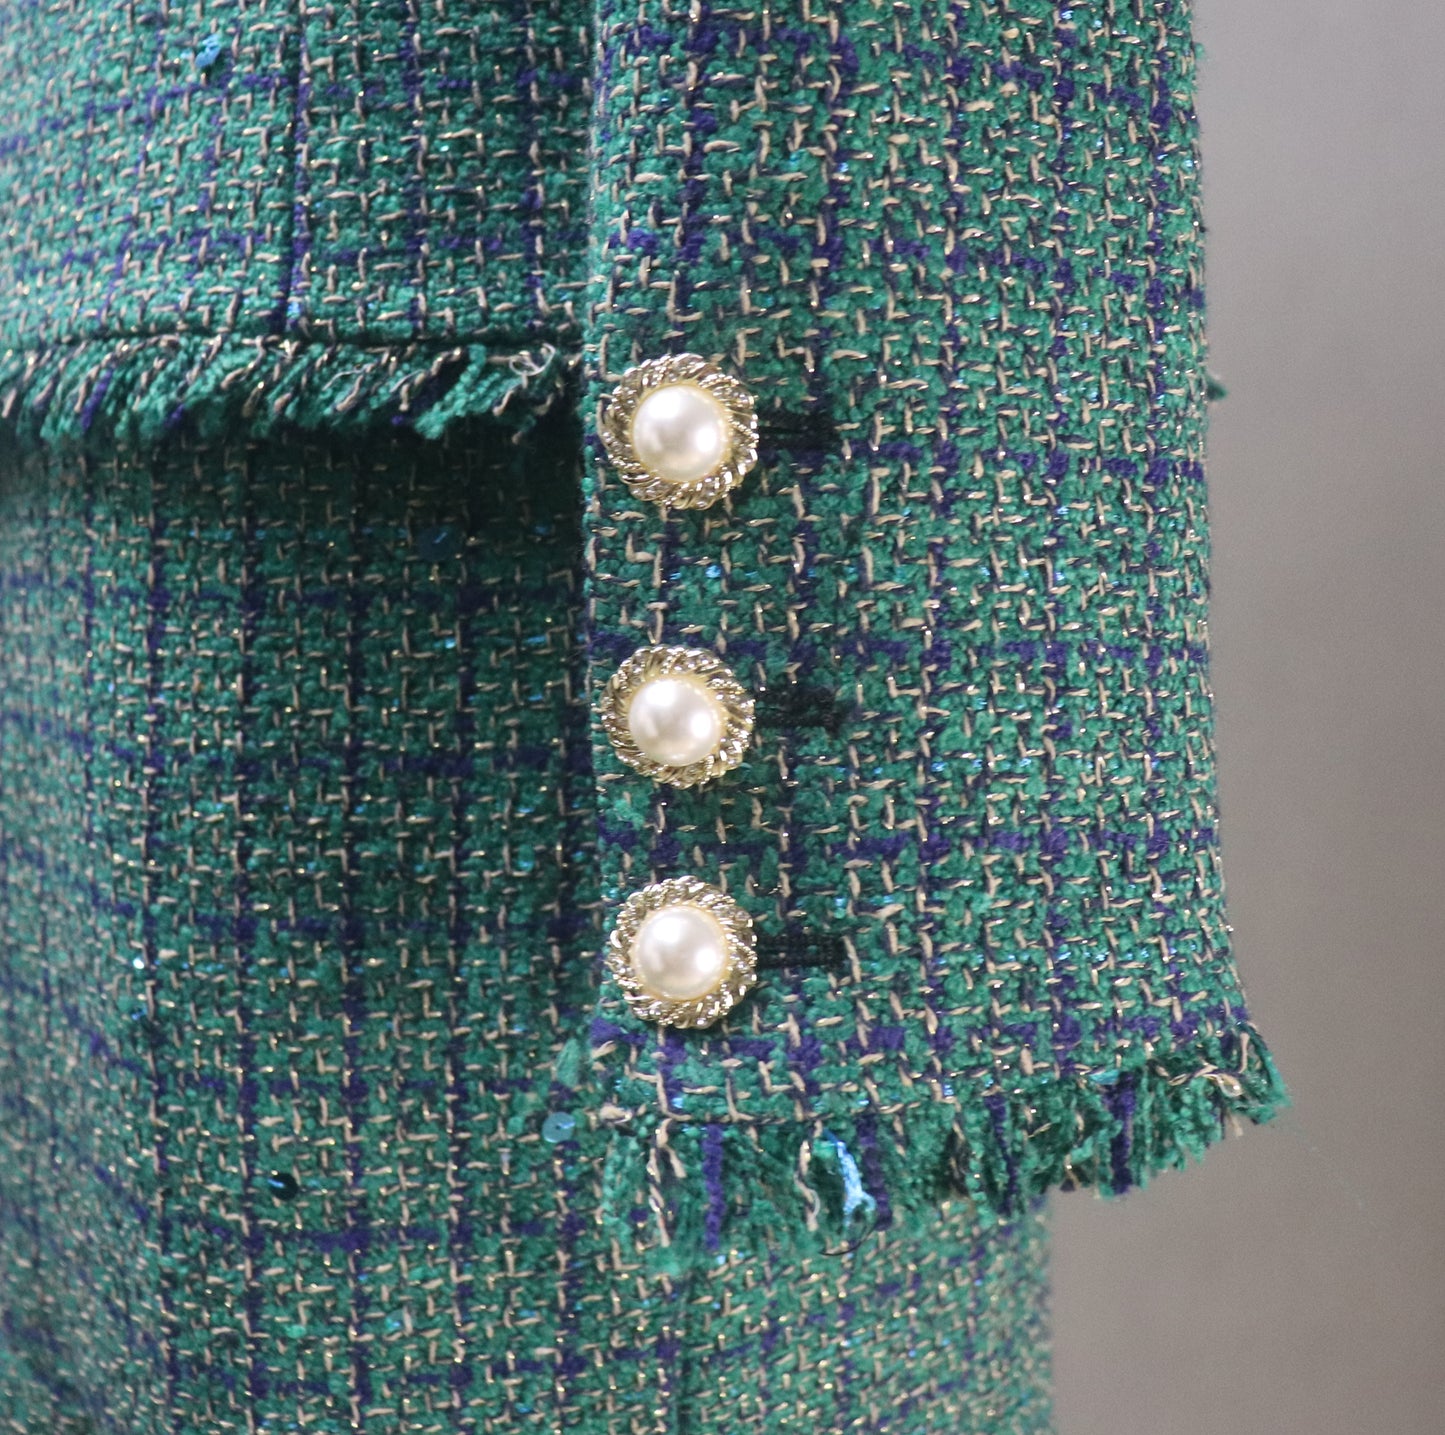 Green Tweed Checked Suit with Fishtail Midi Skirt